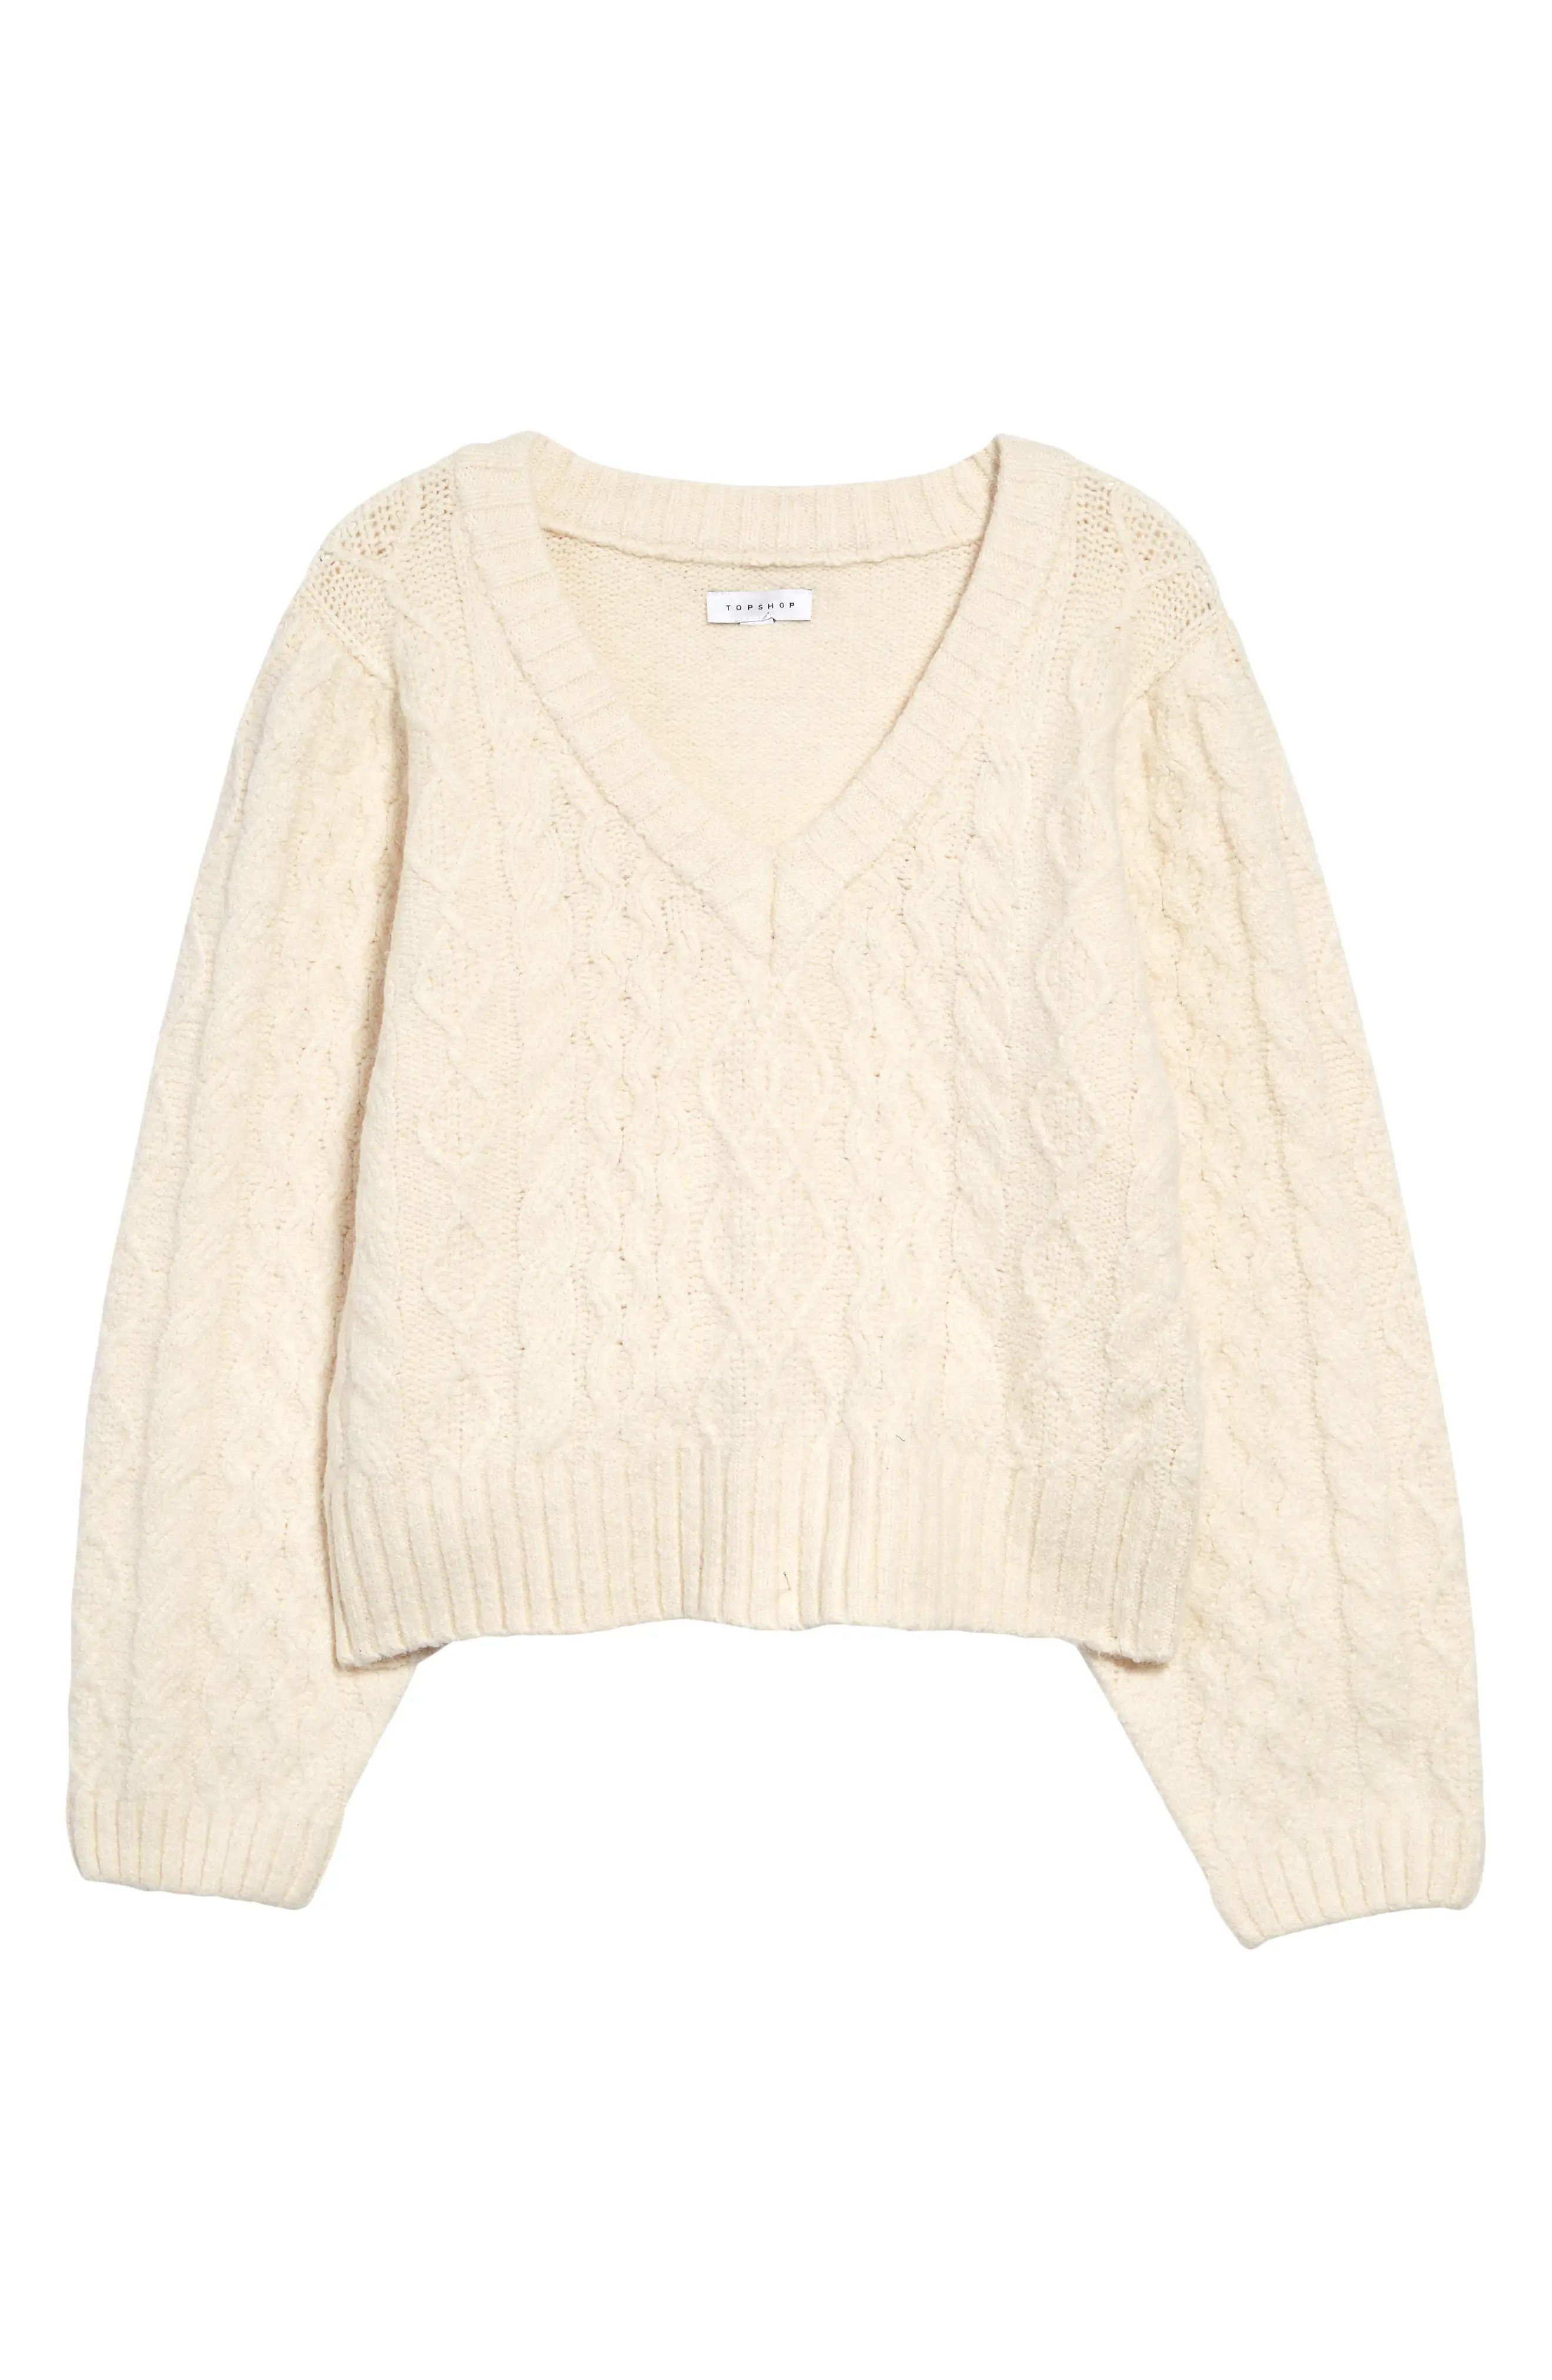 Topshop V-Neck Cable Sweater in White at Nordstrom, Size X-Large | Nordstrom